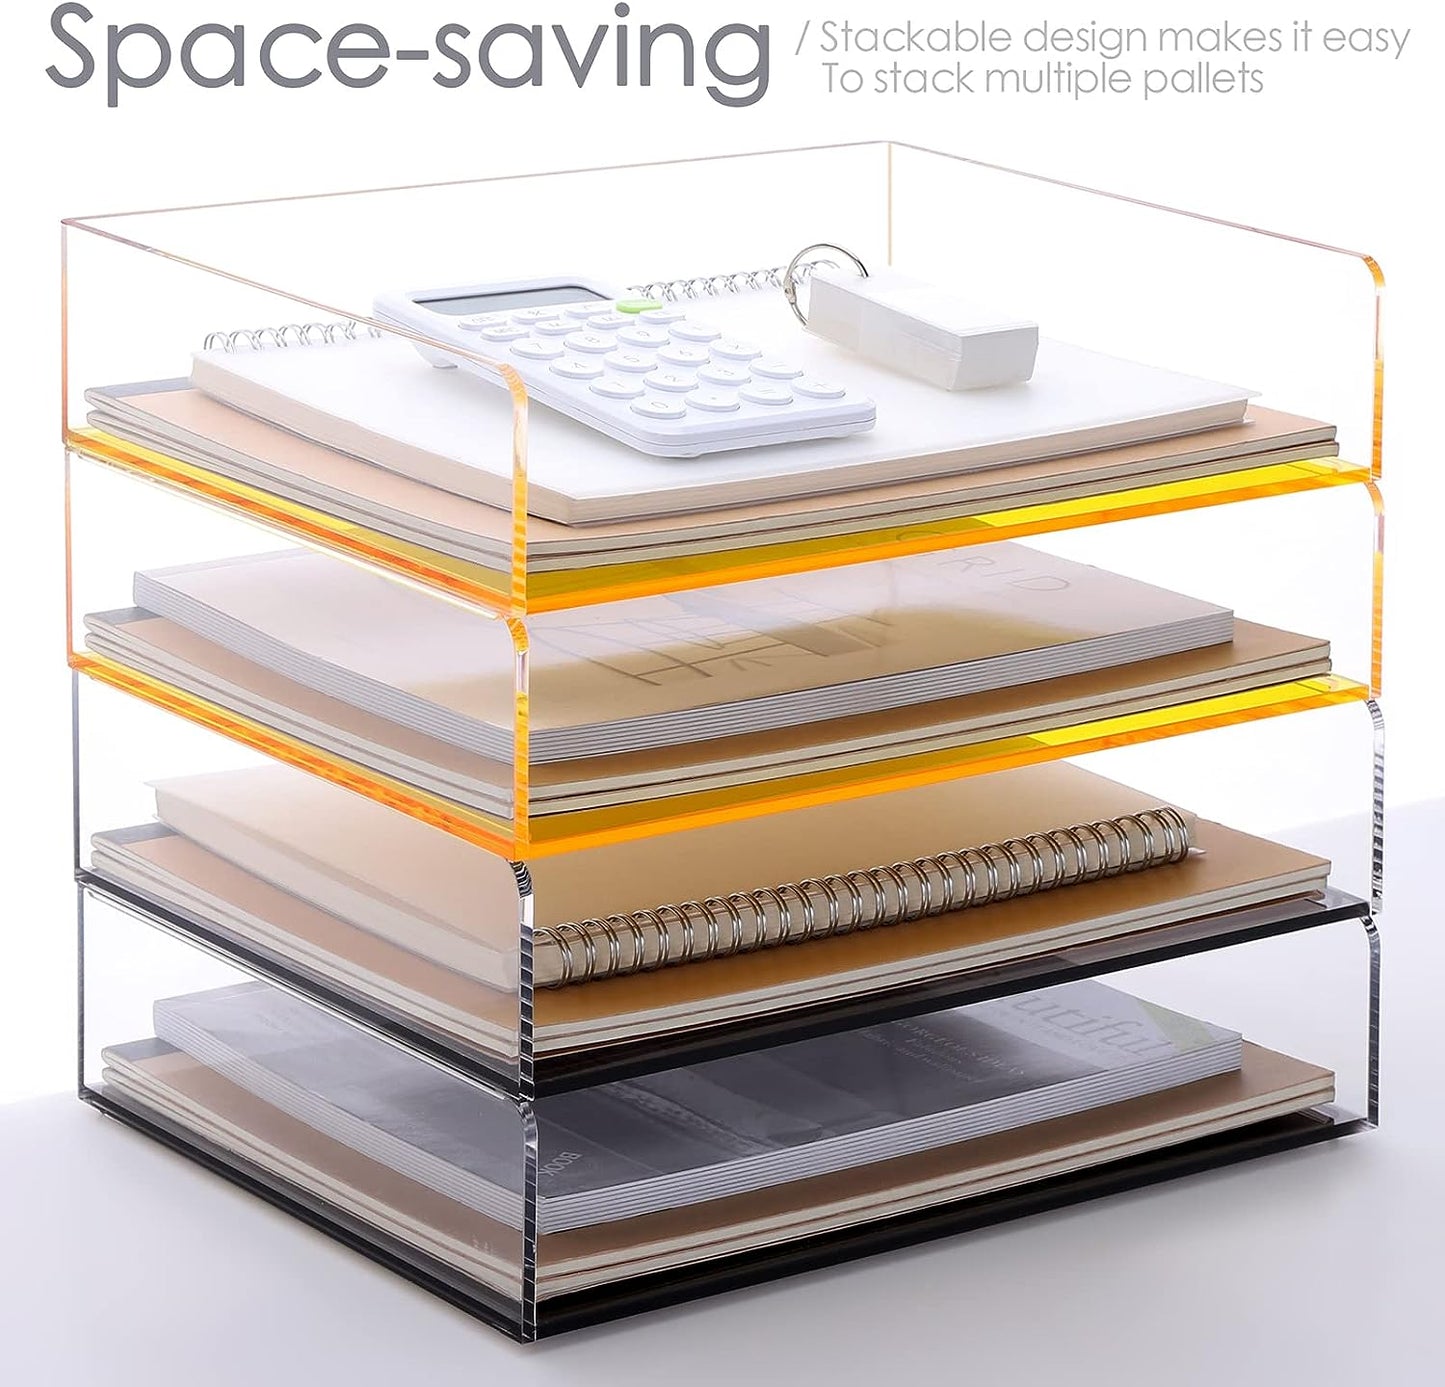 Acrylic Stackable Letter Tray Clear Paper Tray Desk Organizer 4-Tier Desk File Organizer Paper Sorter Holder Document Shelf Tray for Letter/A4,4-Pack